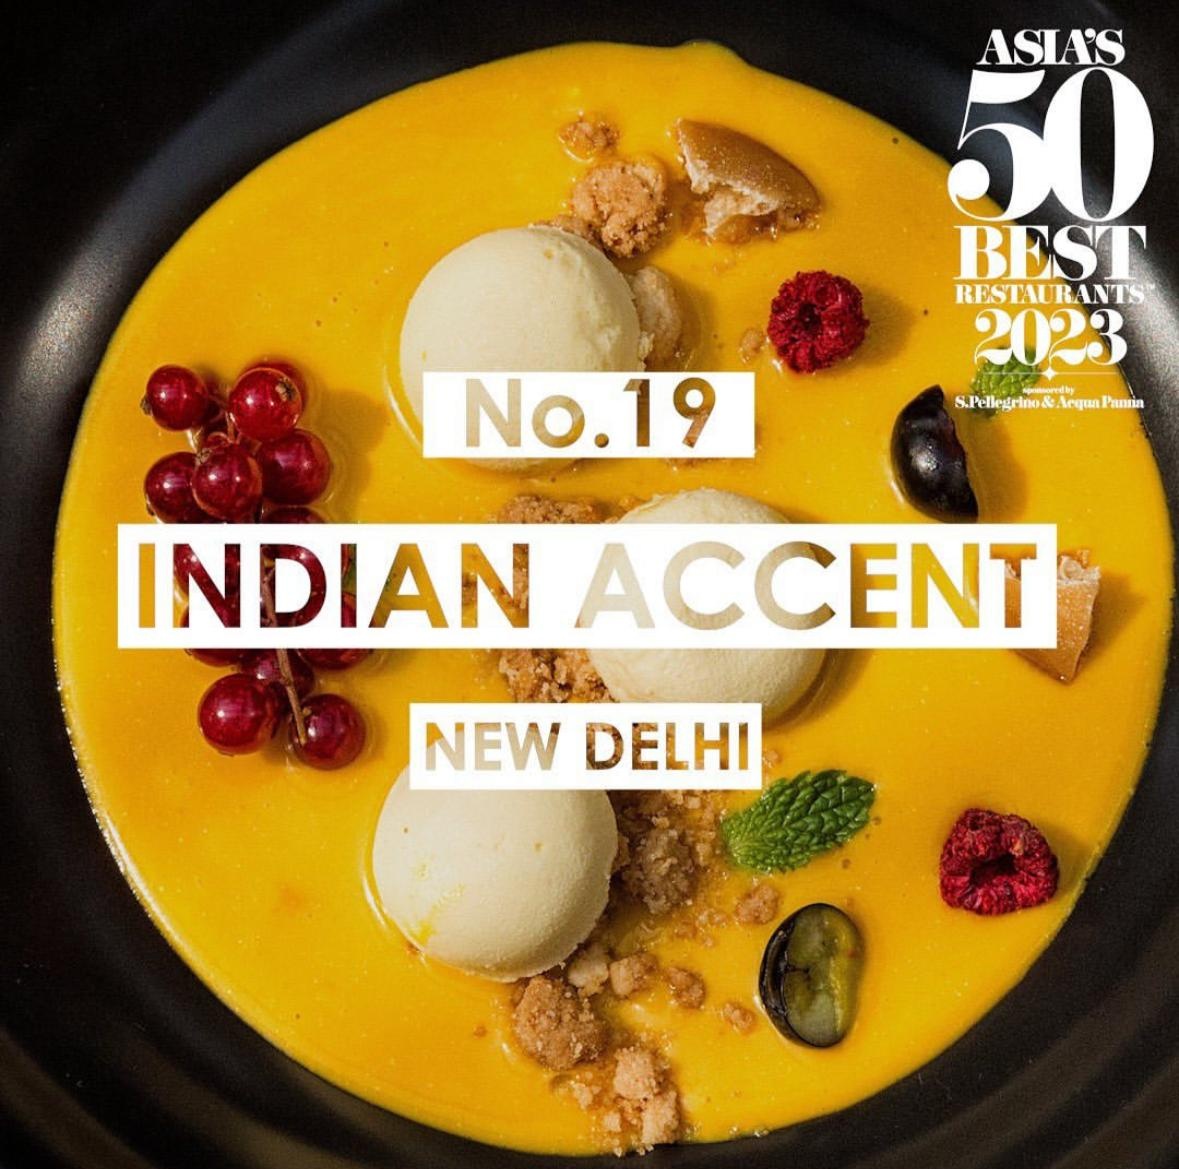 No. 19 in Asia! 10th consecutive year to be in Asia's 50 Best! Proud @Indian_Accent @IndianAccentNYC @shantanumehrotr @RijulGulati @TheWorlds50Best @AcquaPanna @Sanpellegrino #asias50best #Worlds50Best #resortsworldsentosa